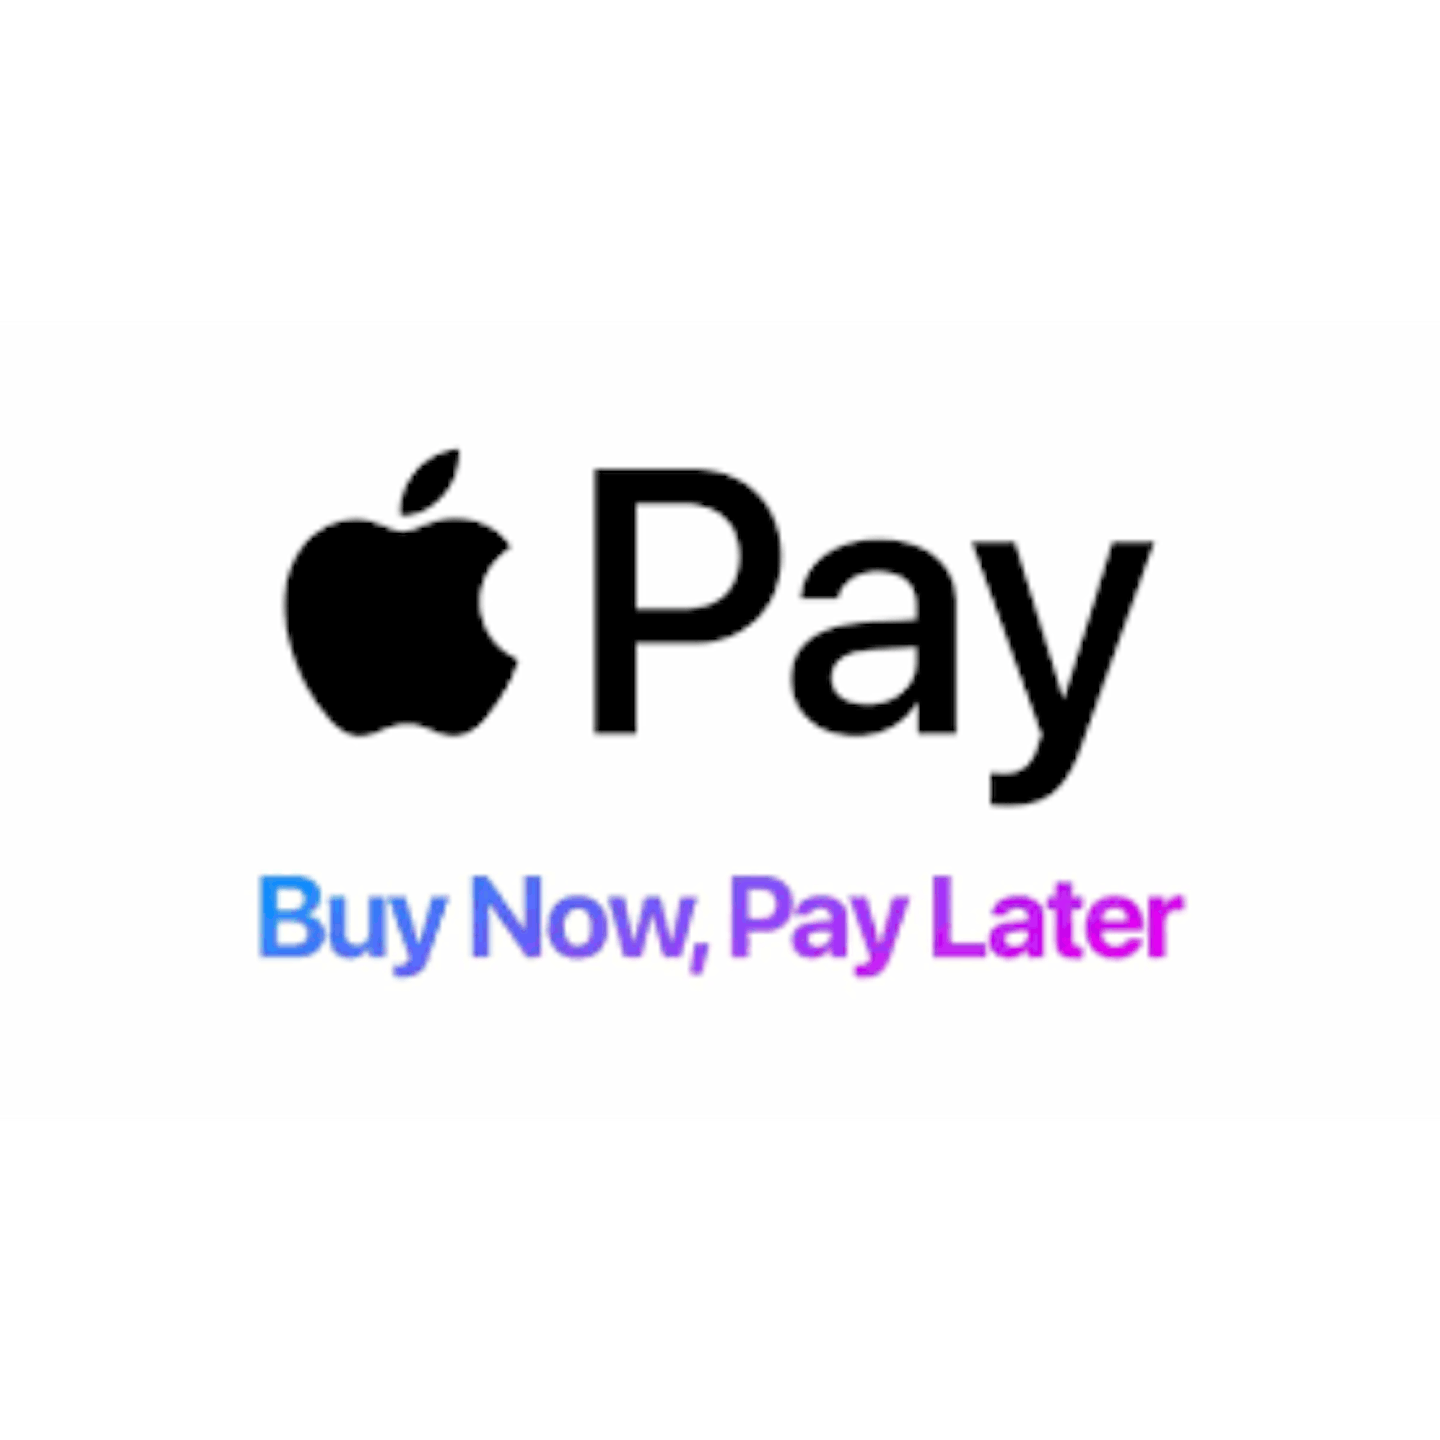 Buy now pay later apps Apple Pay Later